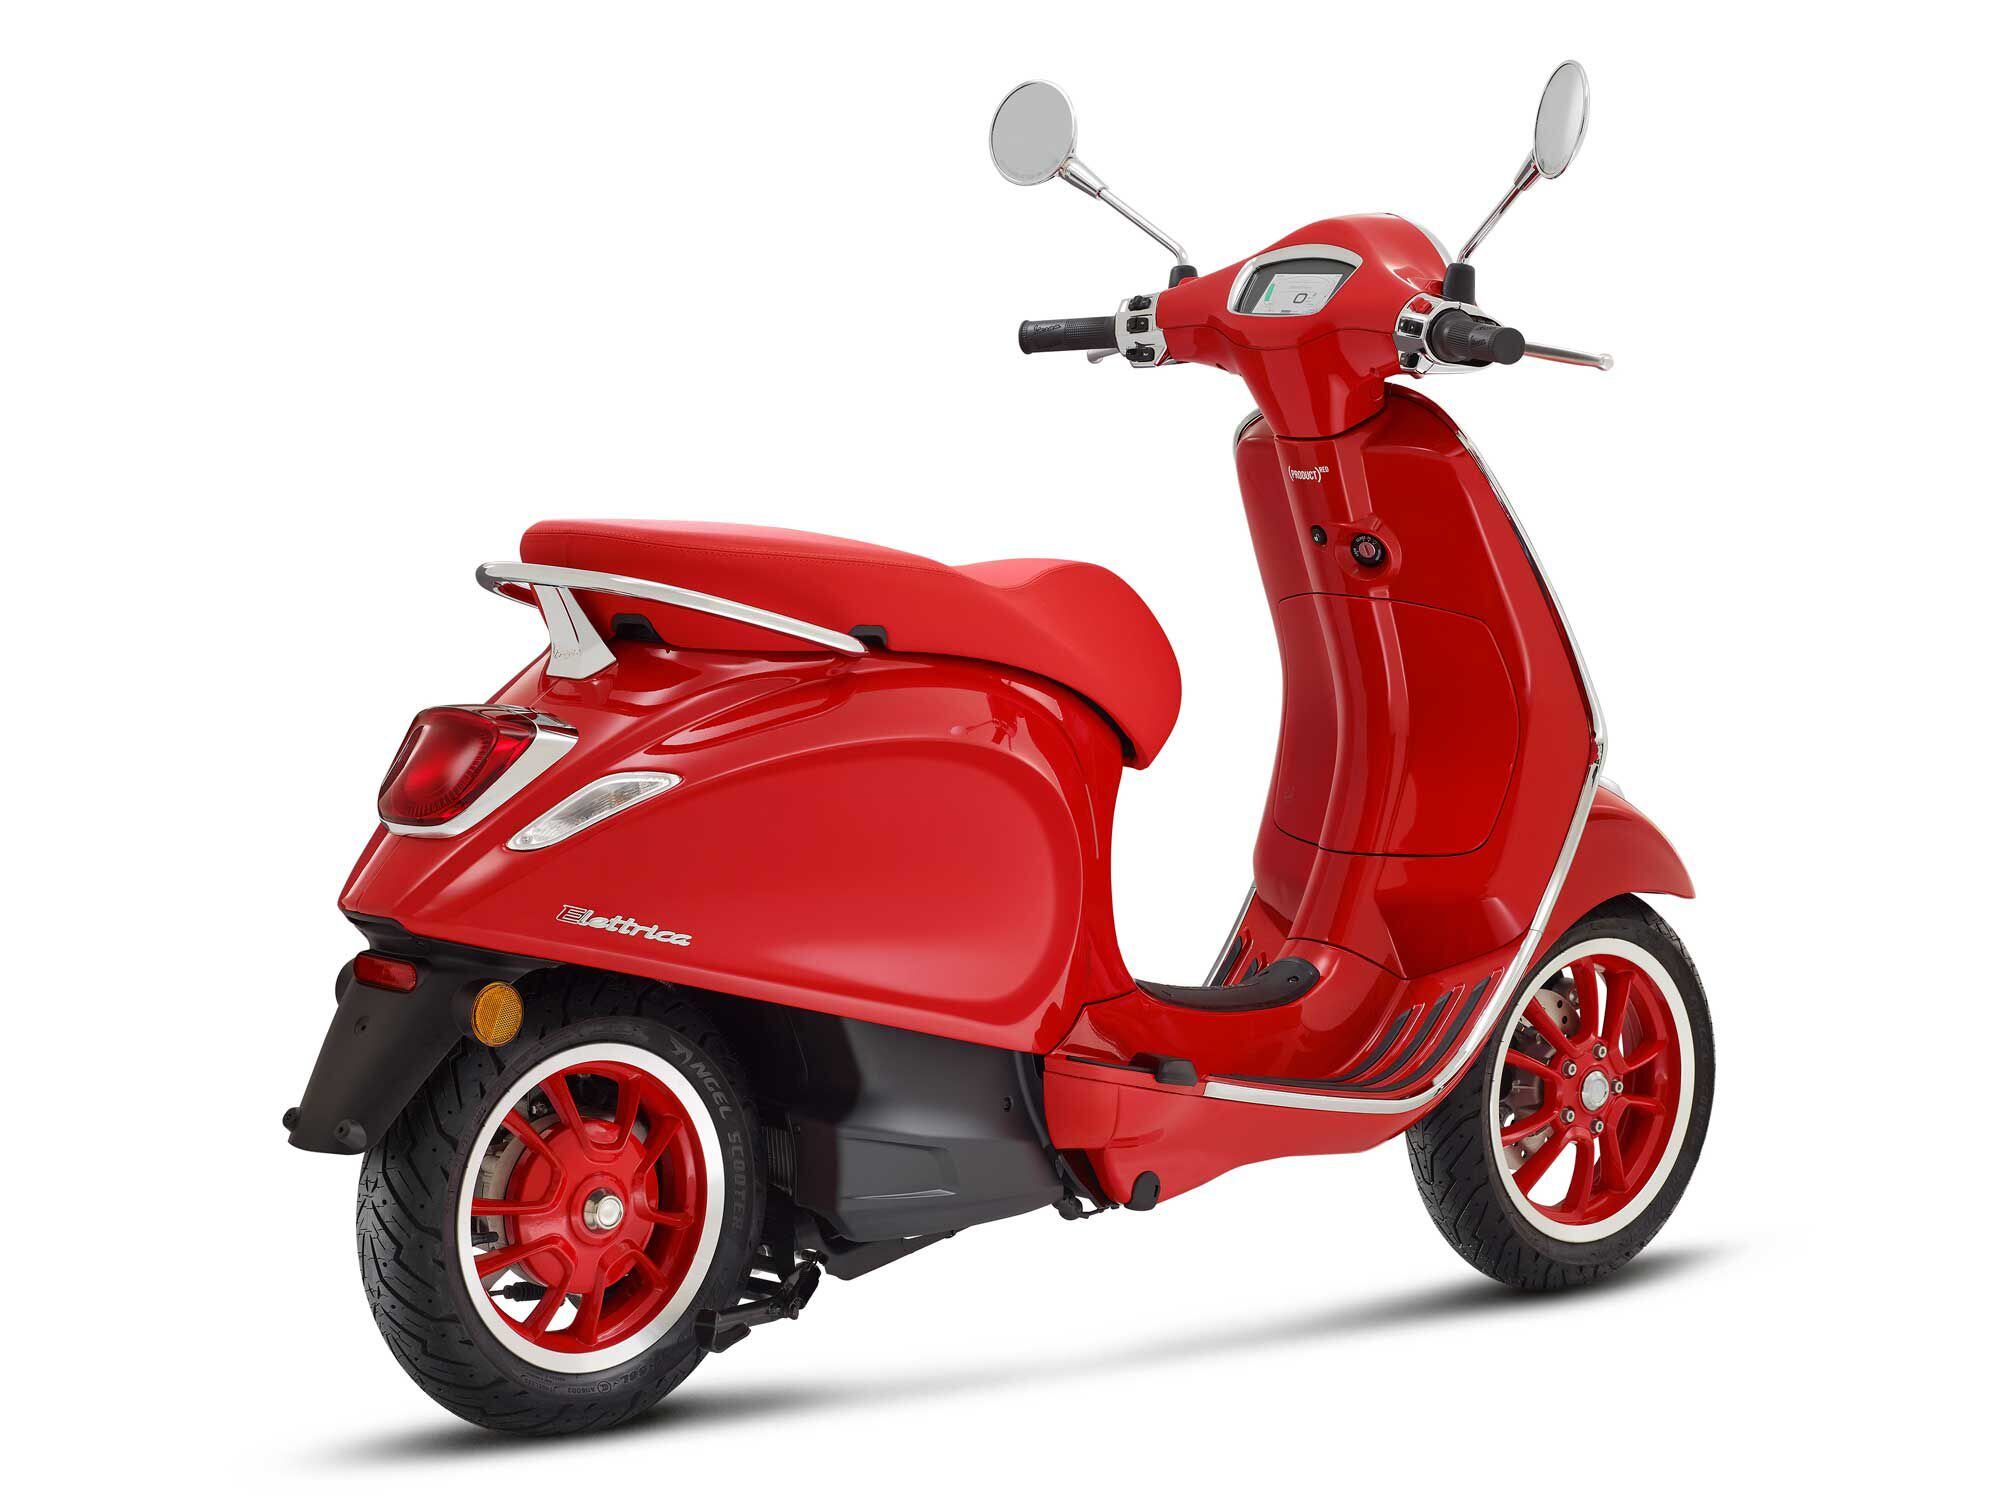 Nearly every surface of the (Vespa Elettrica) RED is, well, red.